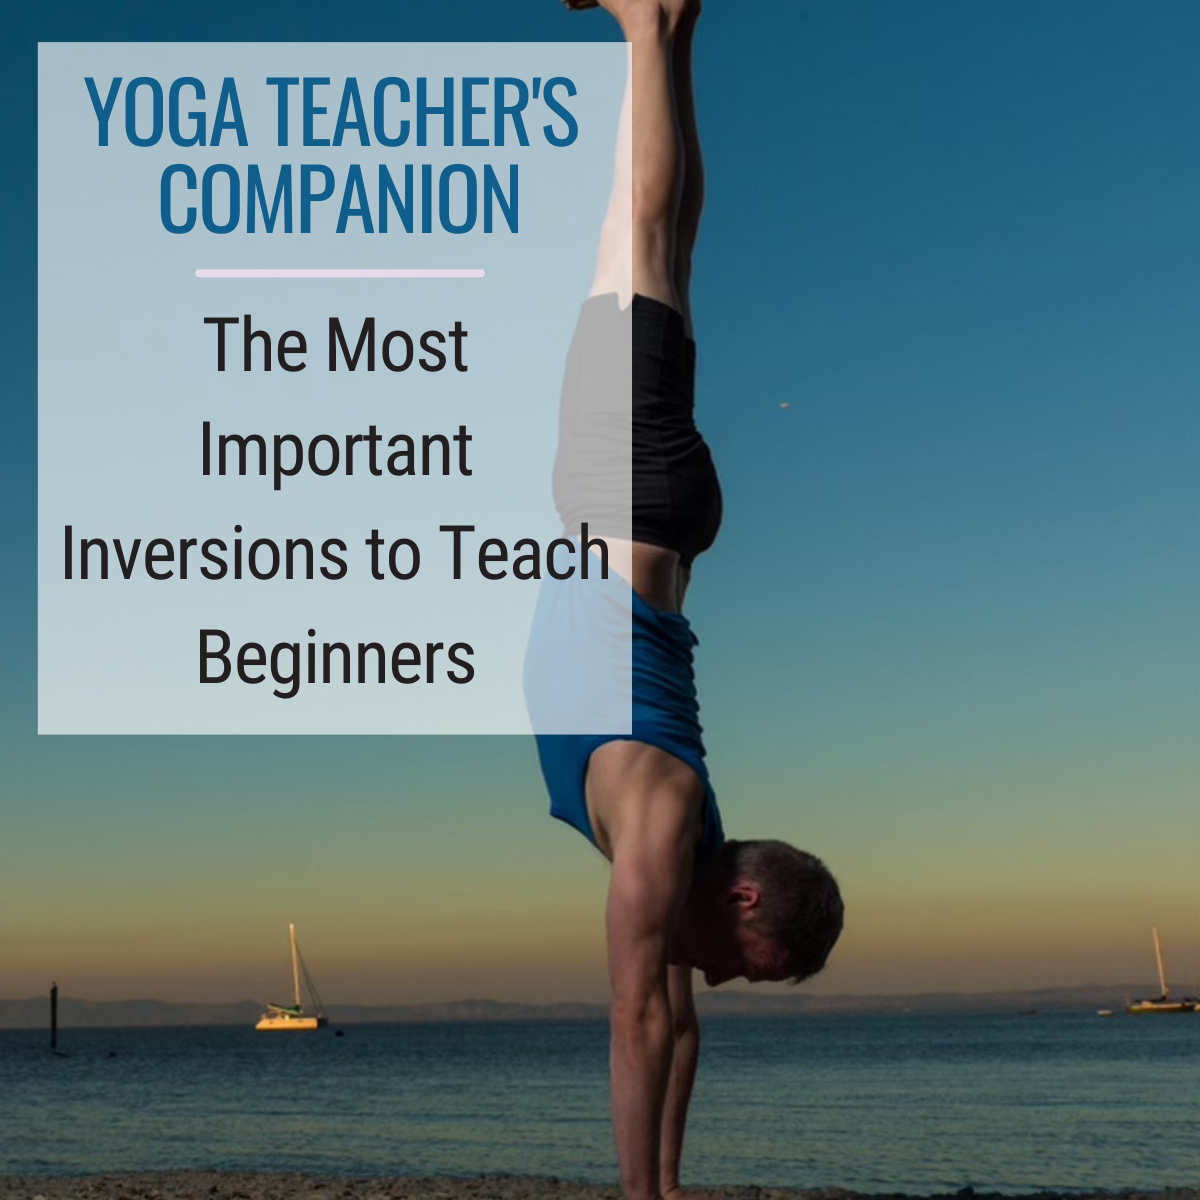 Yoga Teacher's Companion title card with Jason Crandell in a handstand in the background against the ocean, the title saying "The Most Important Inversions to Teach Beginners"